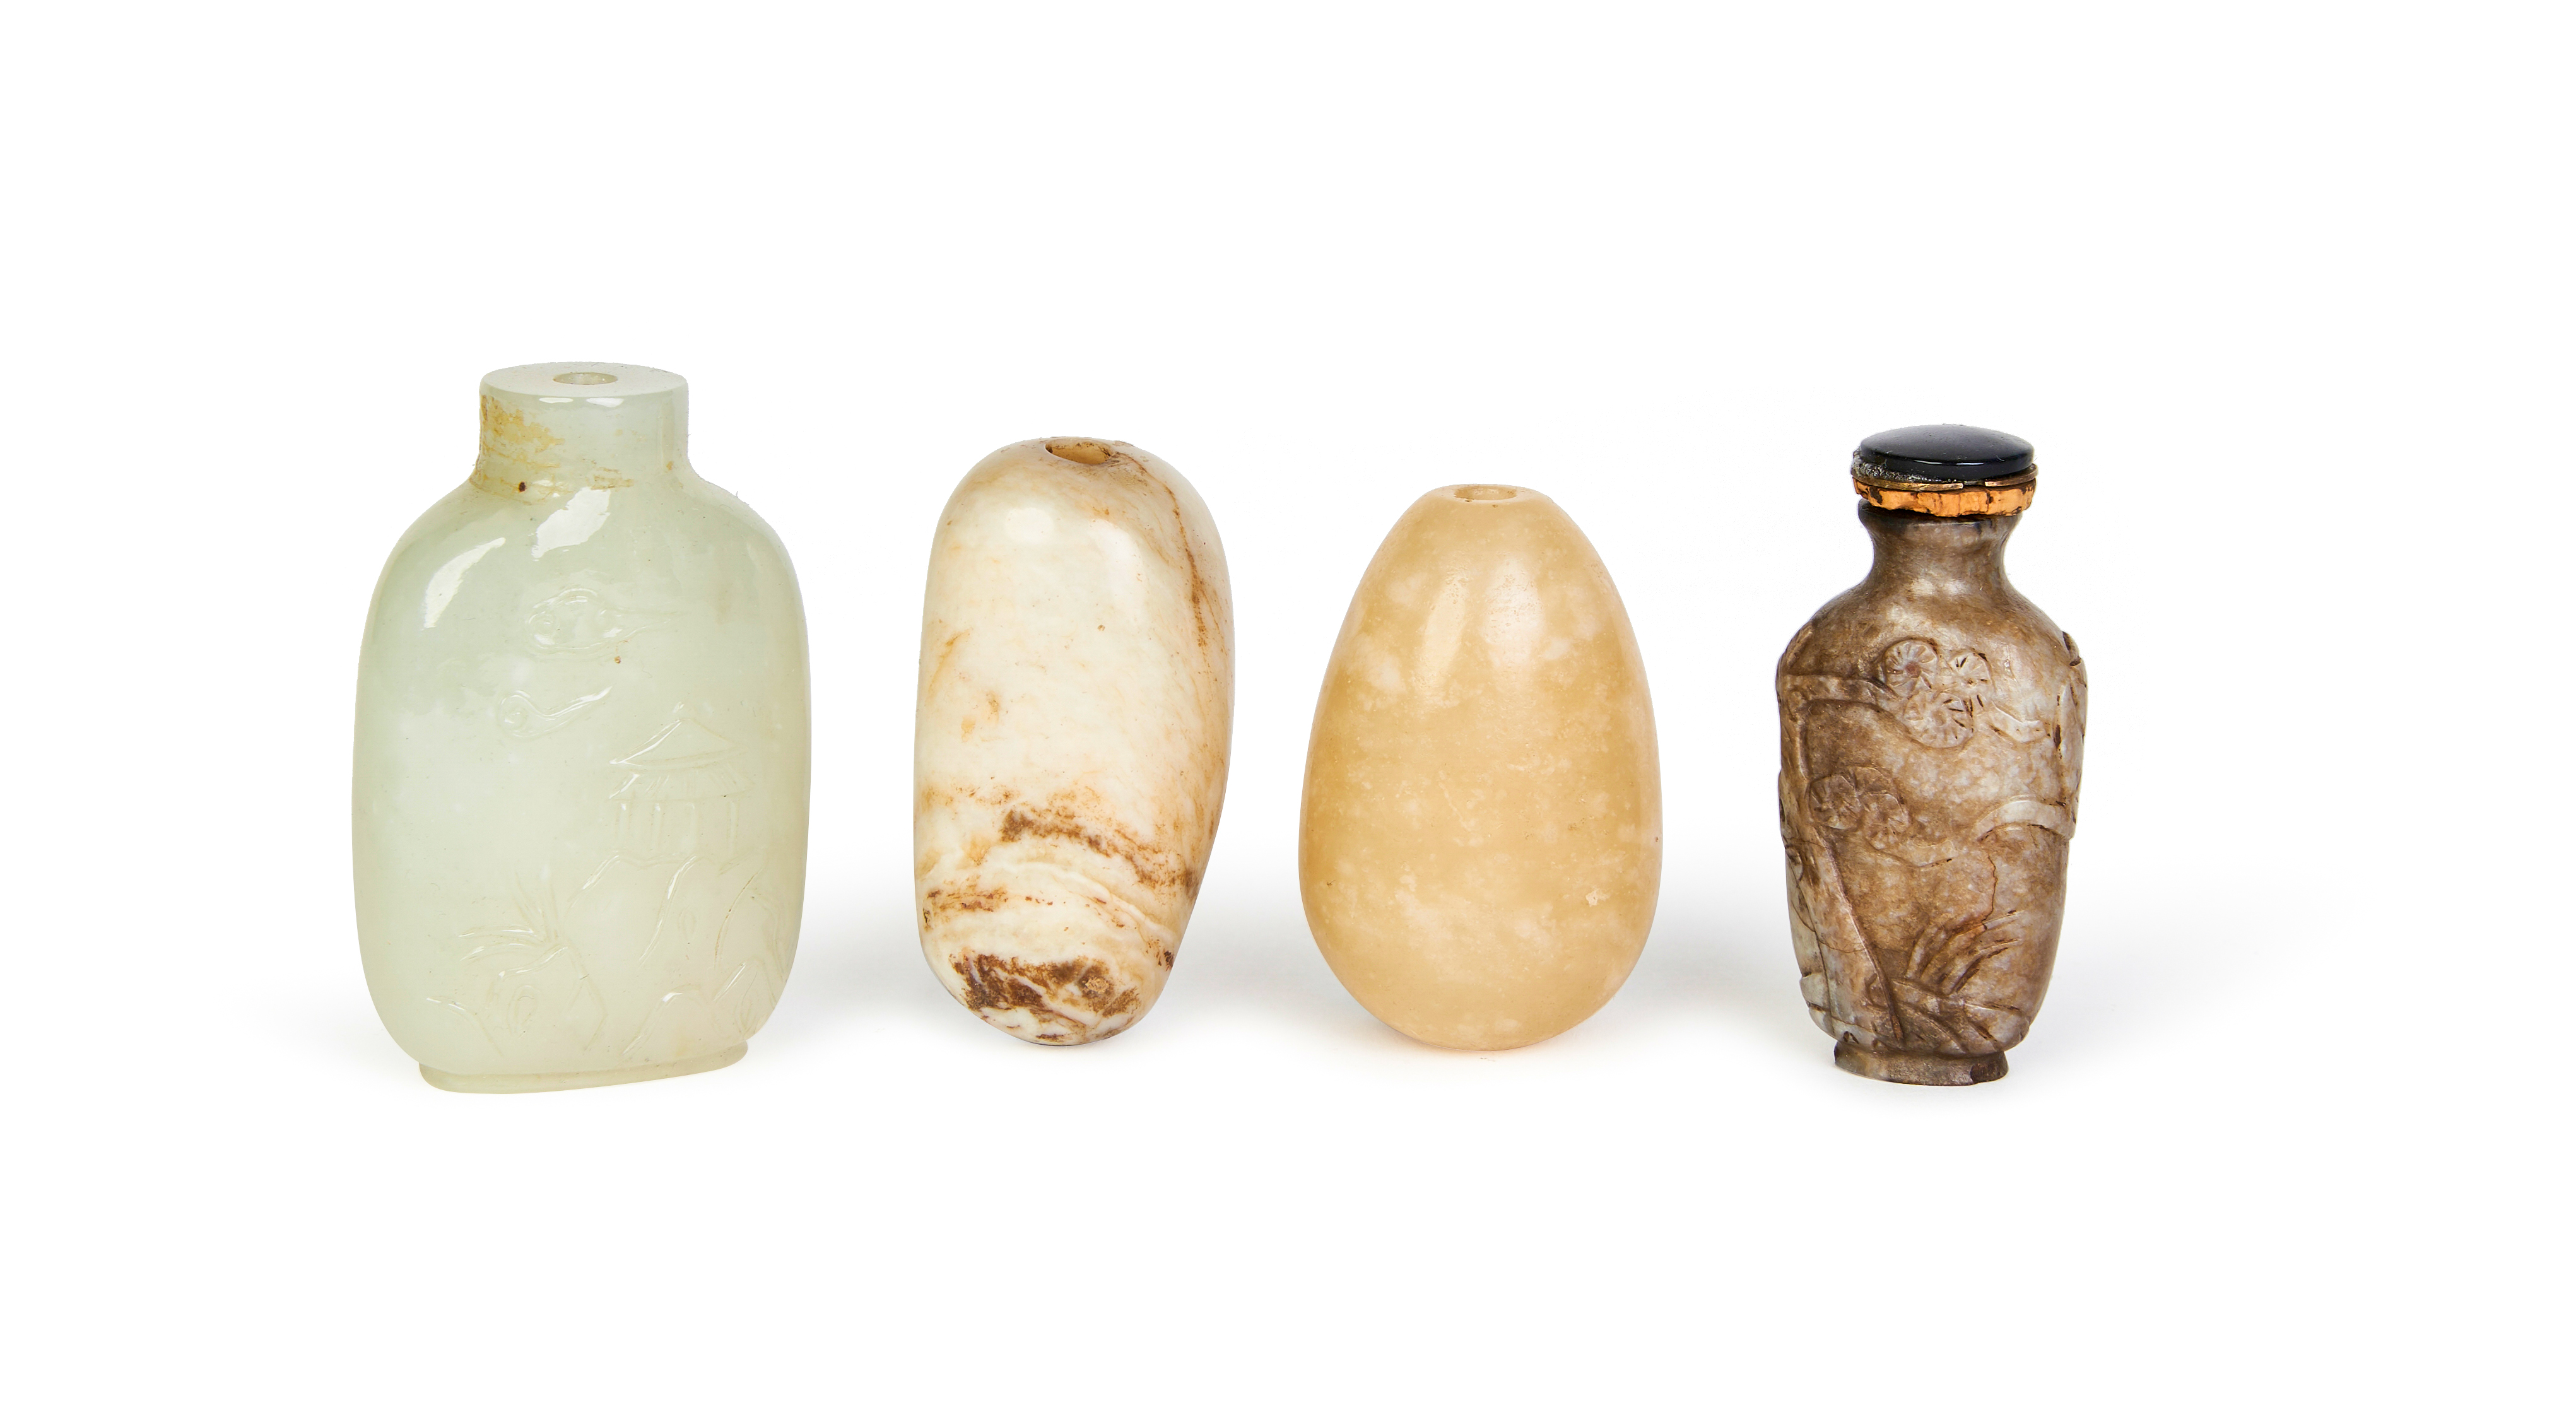 FOUR CHINESE CARVED JADE SNUFF BOTTLES, QING DYNASTY (1644-1911)